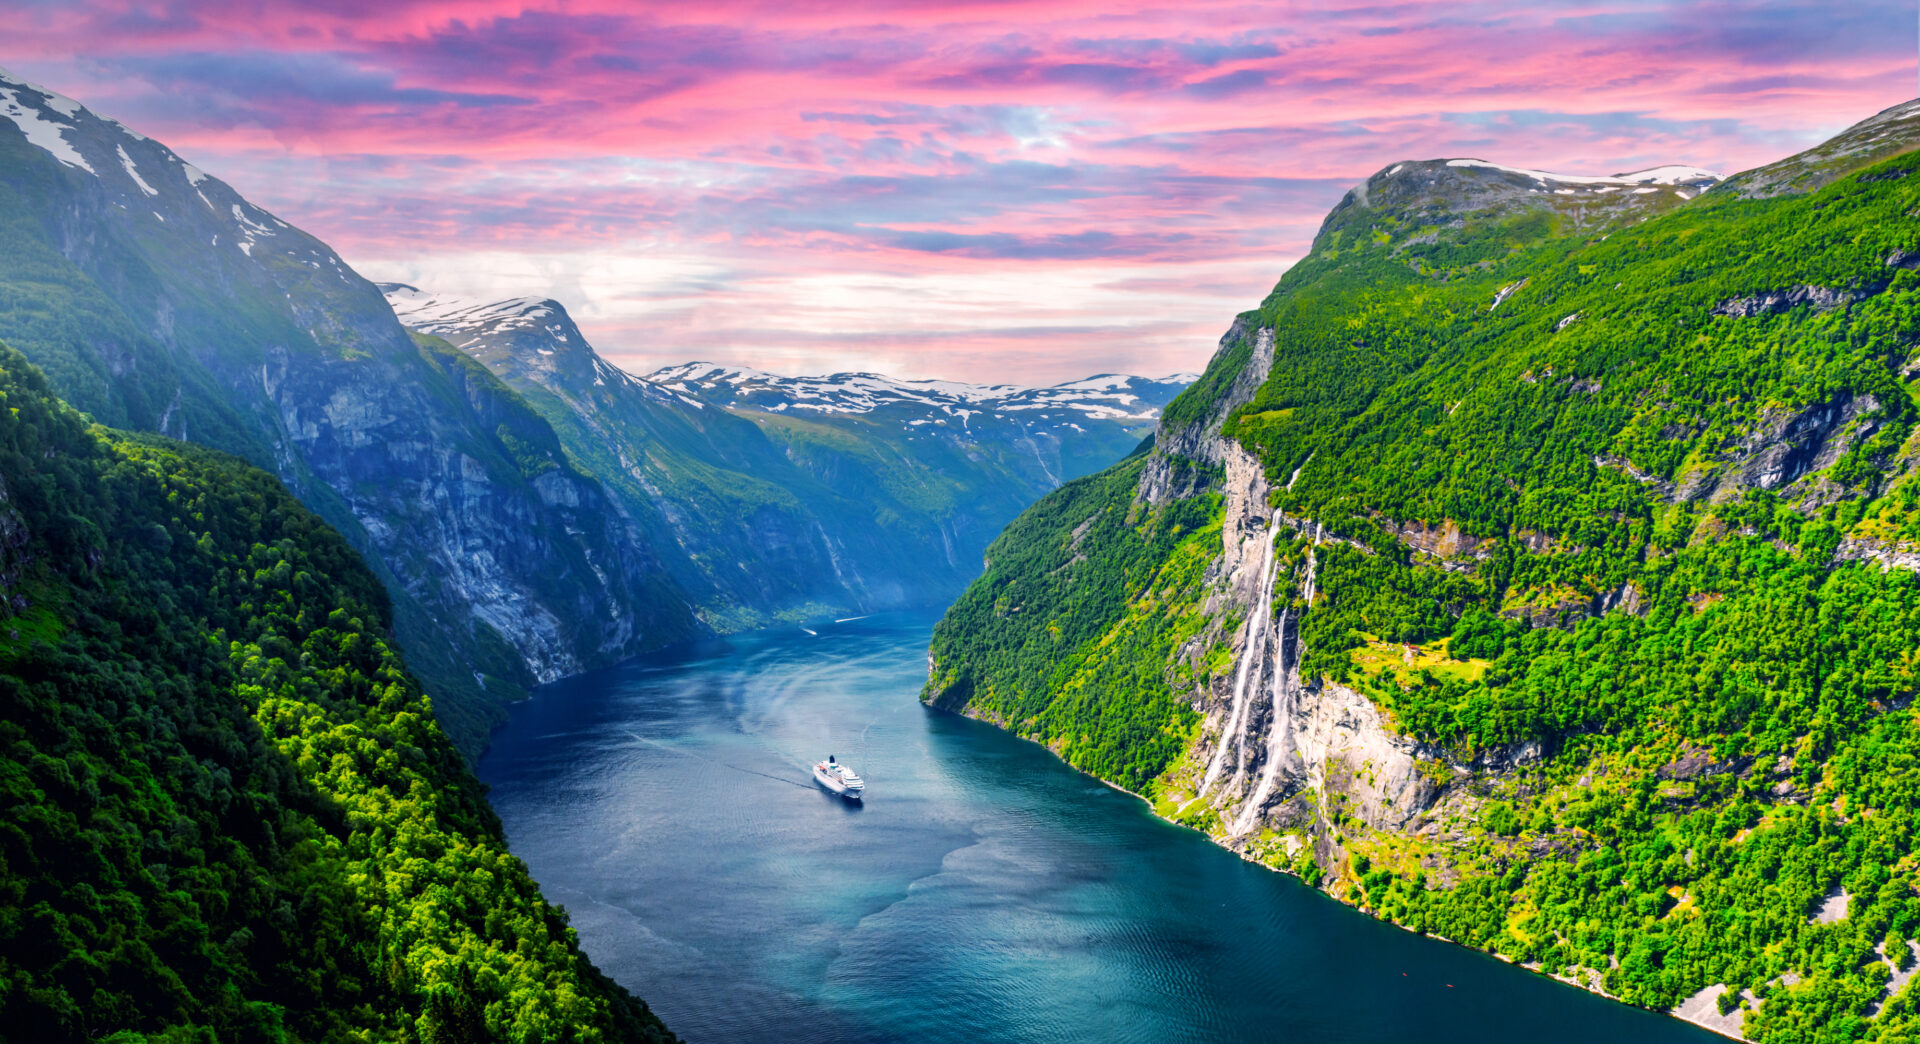 Panoramic view of the Sunnylvsfjord near Geiranger, western Norway, featuring a cruise ship and the famous Seven Sisters waterfalls